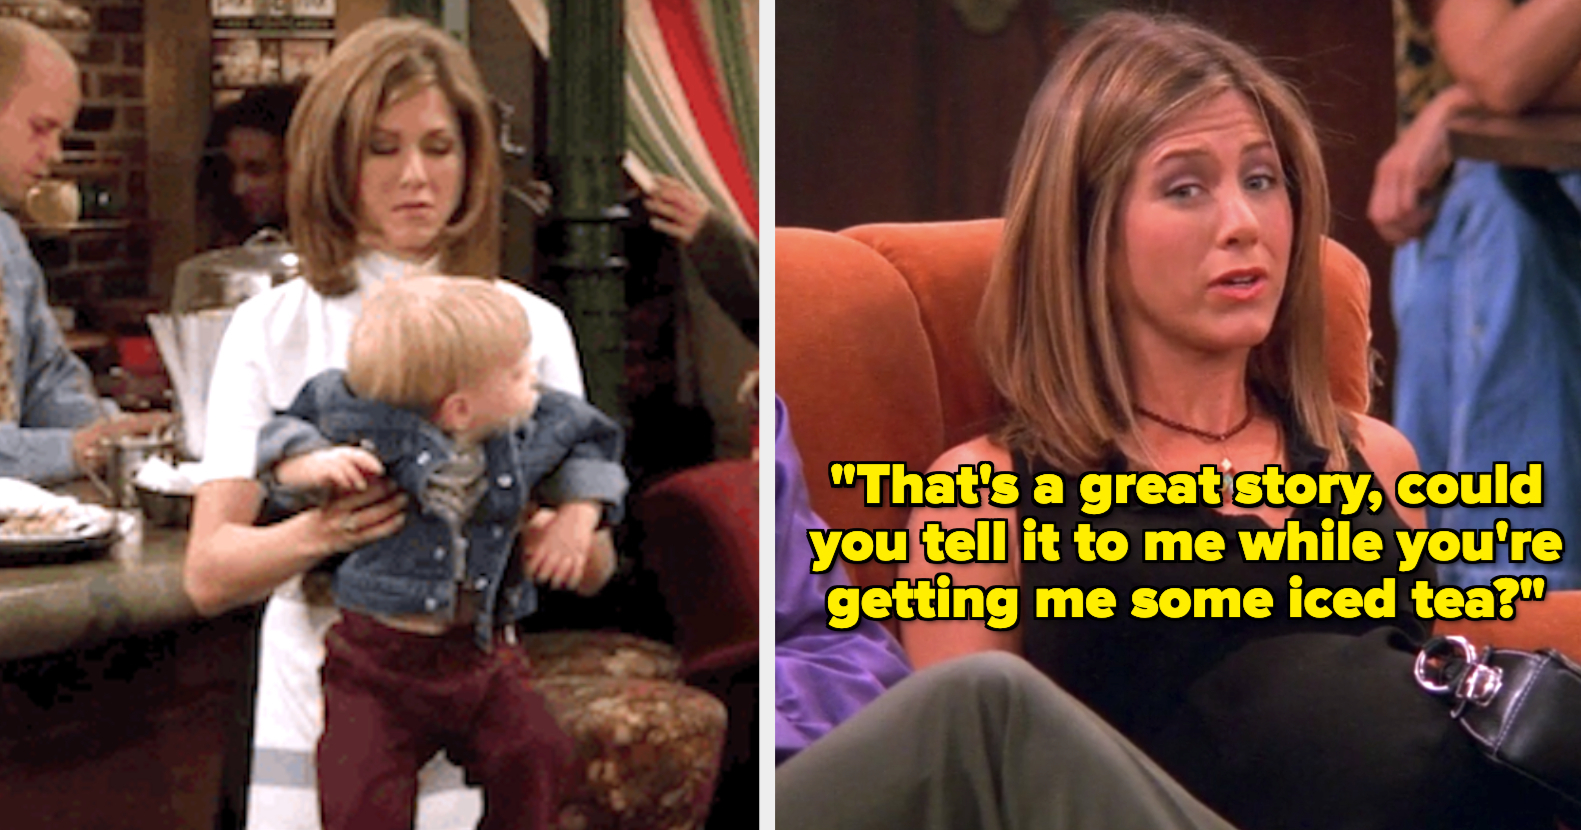 Friends - Rachel is pregnant on Make a GIF